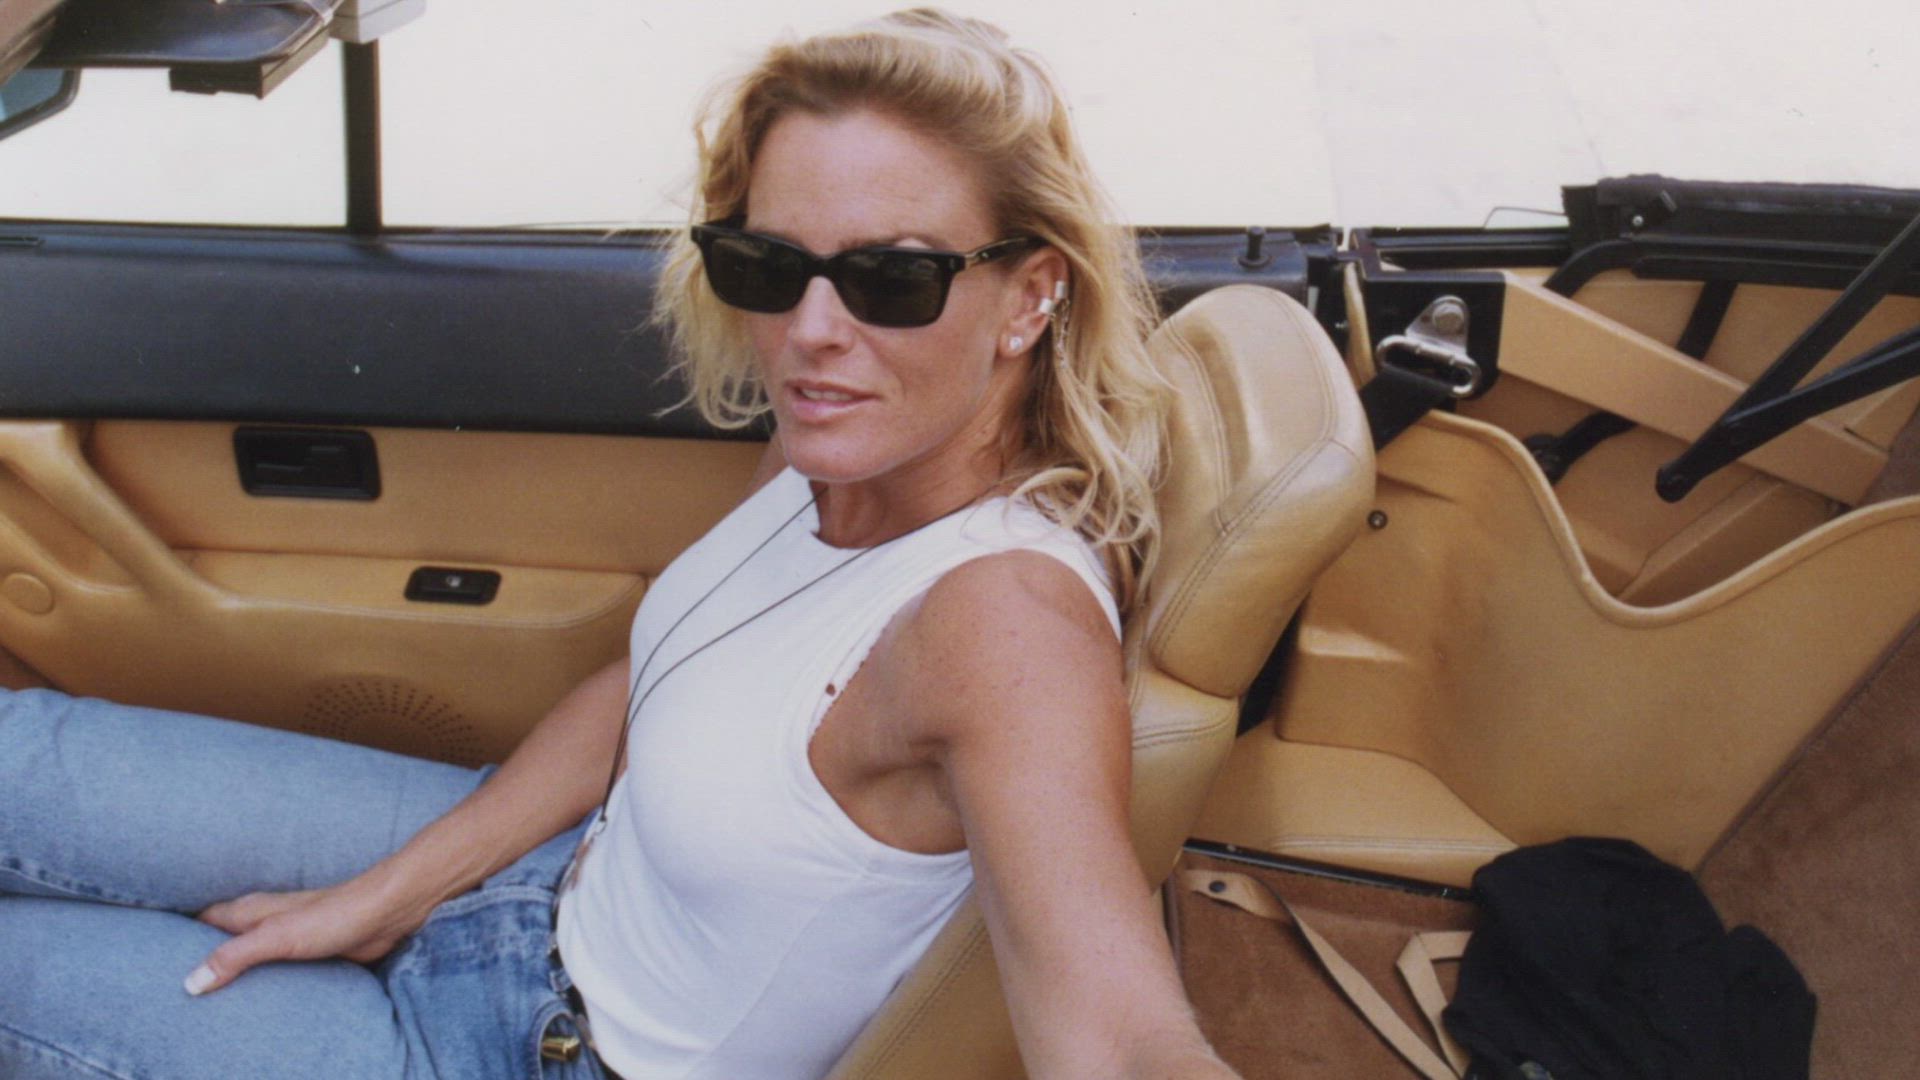 The Life &amp; Murder of Nicole Brown Simpson